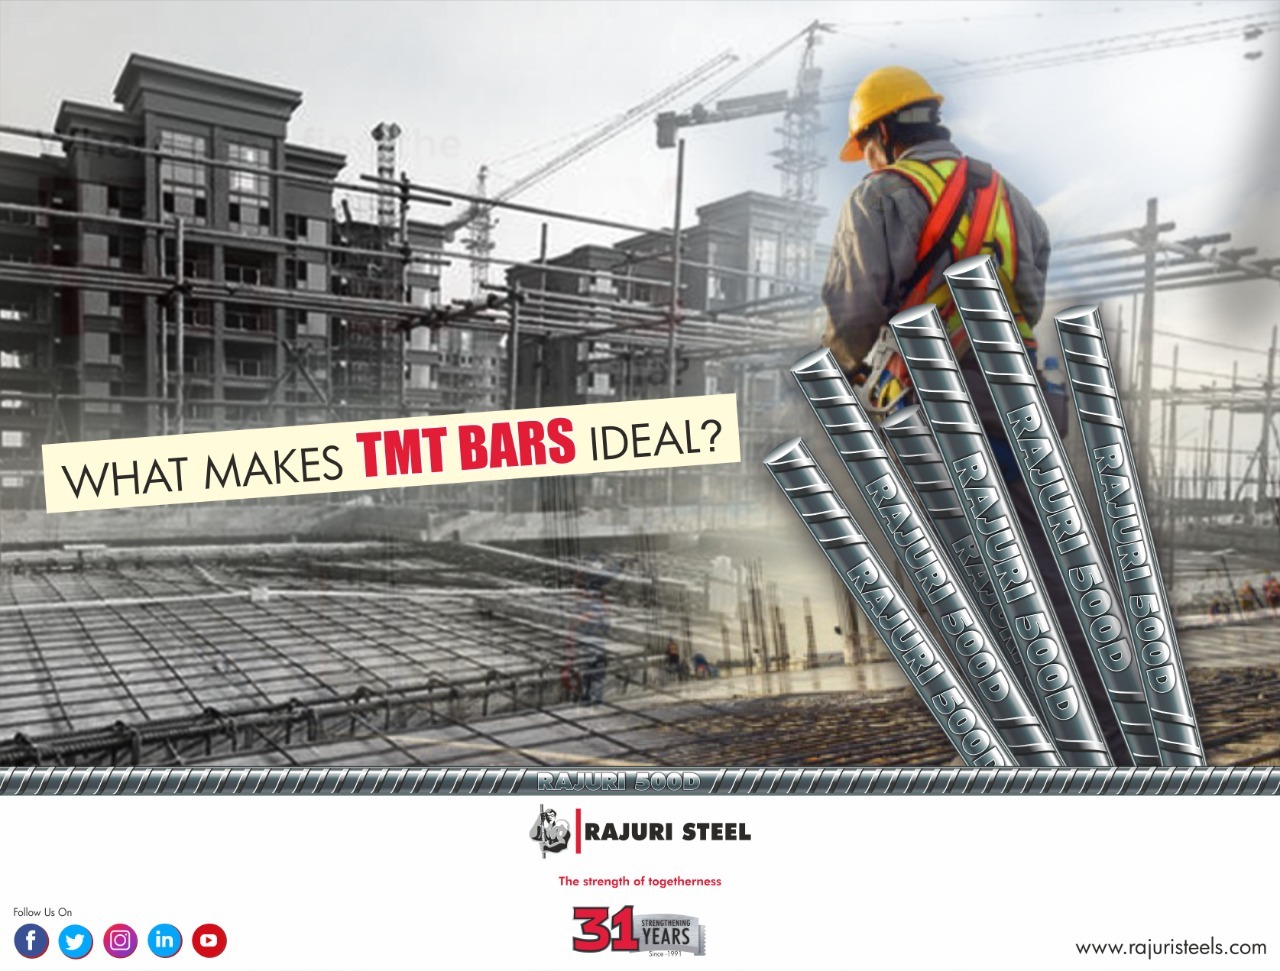 WHAT MAKES TMT BARS IDEAL